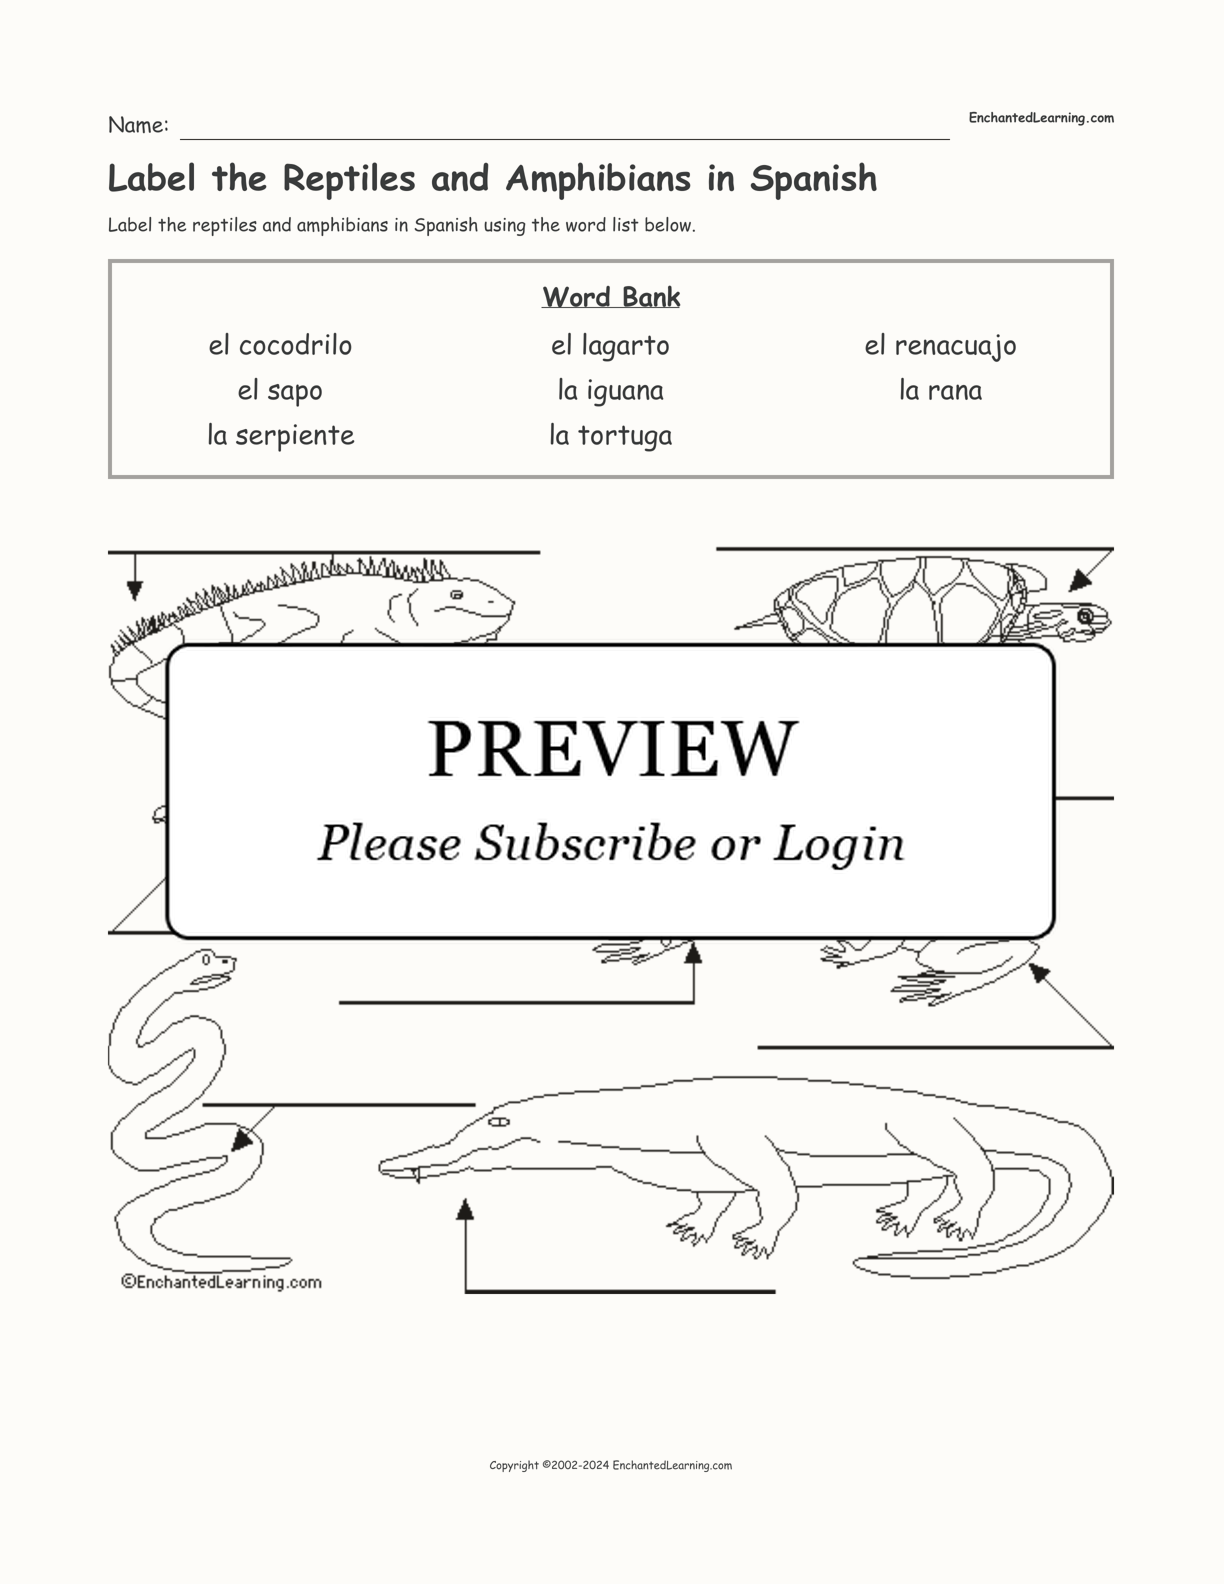 Label the Reptiles and Amphibians in Spanish interactive worksheet page 1